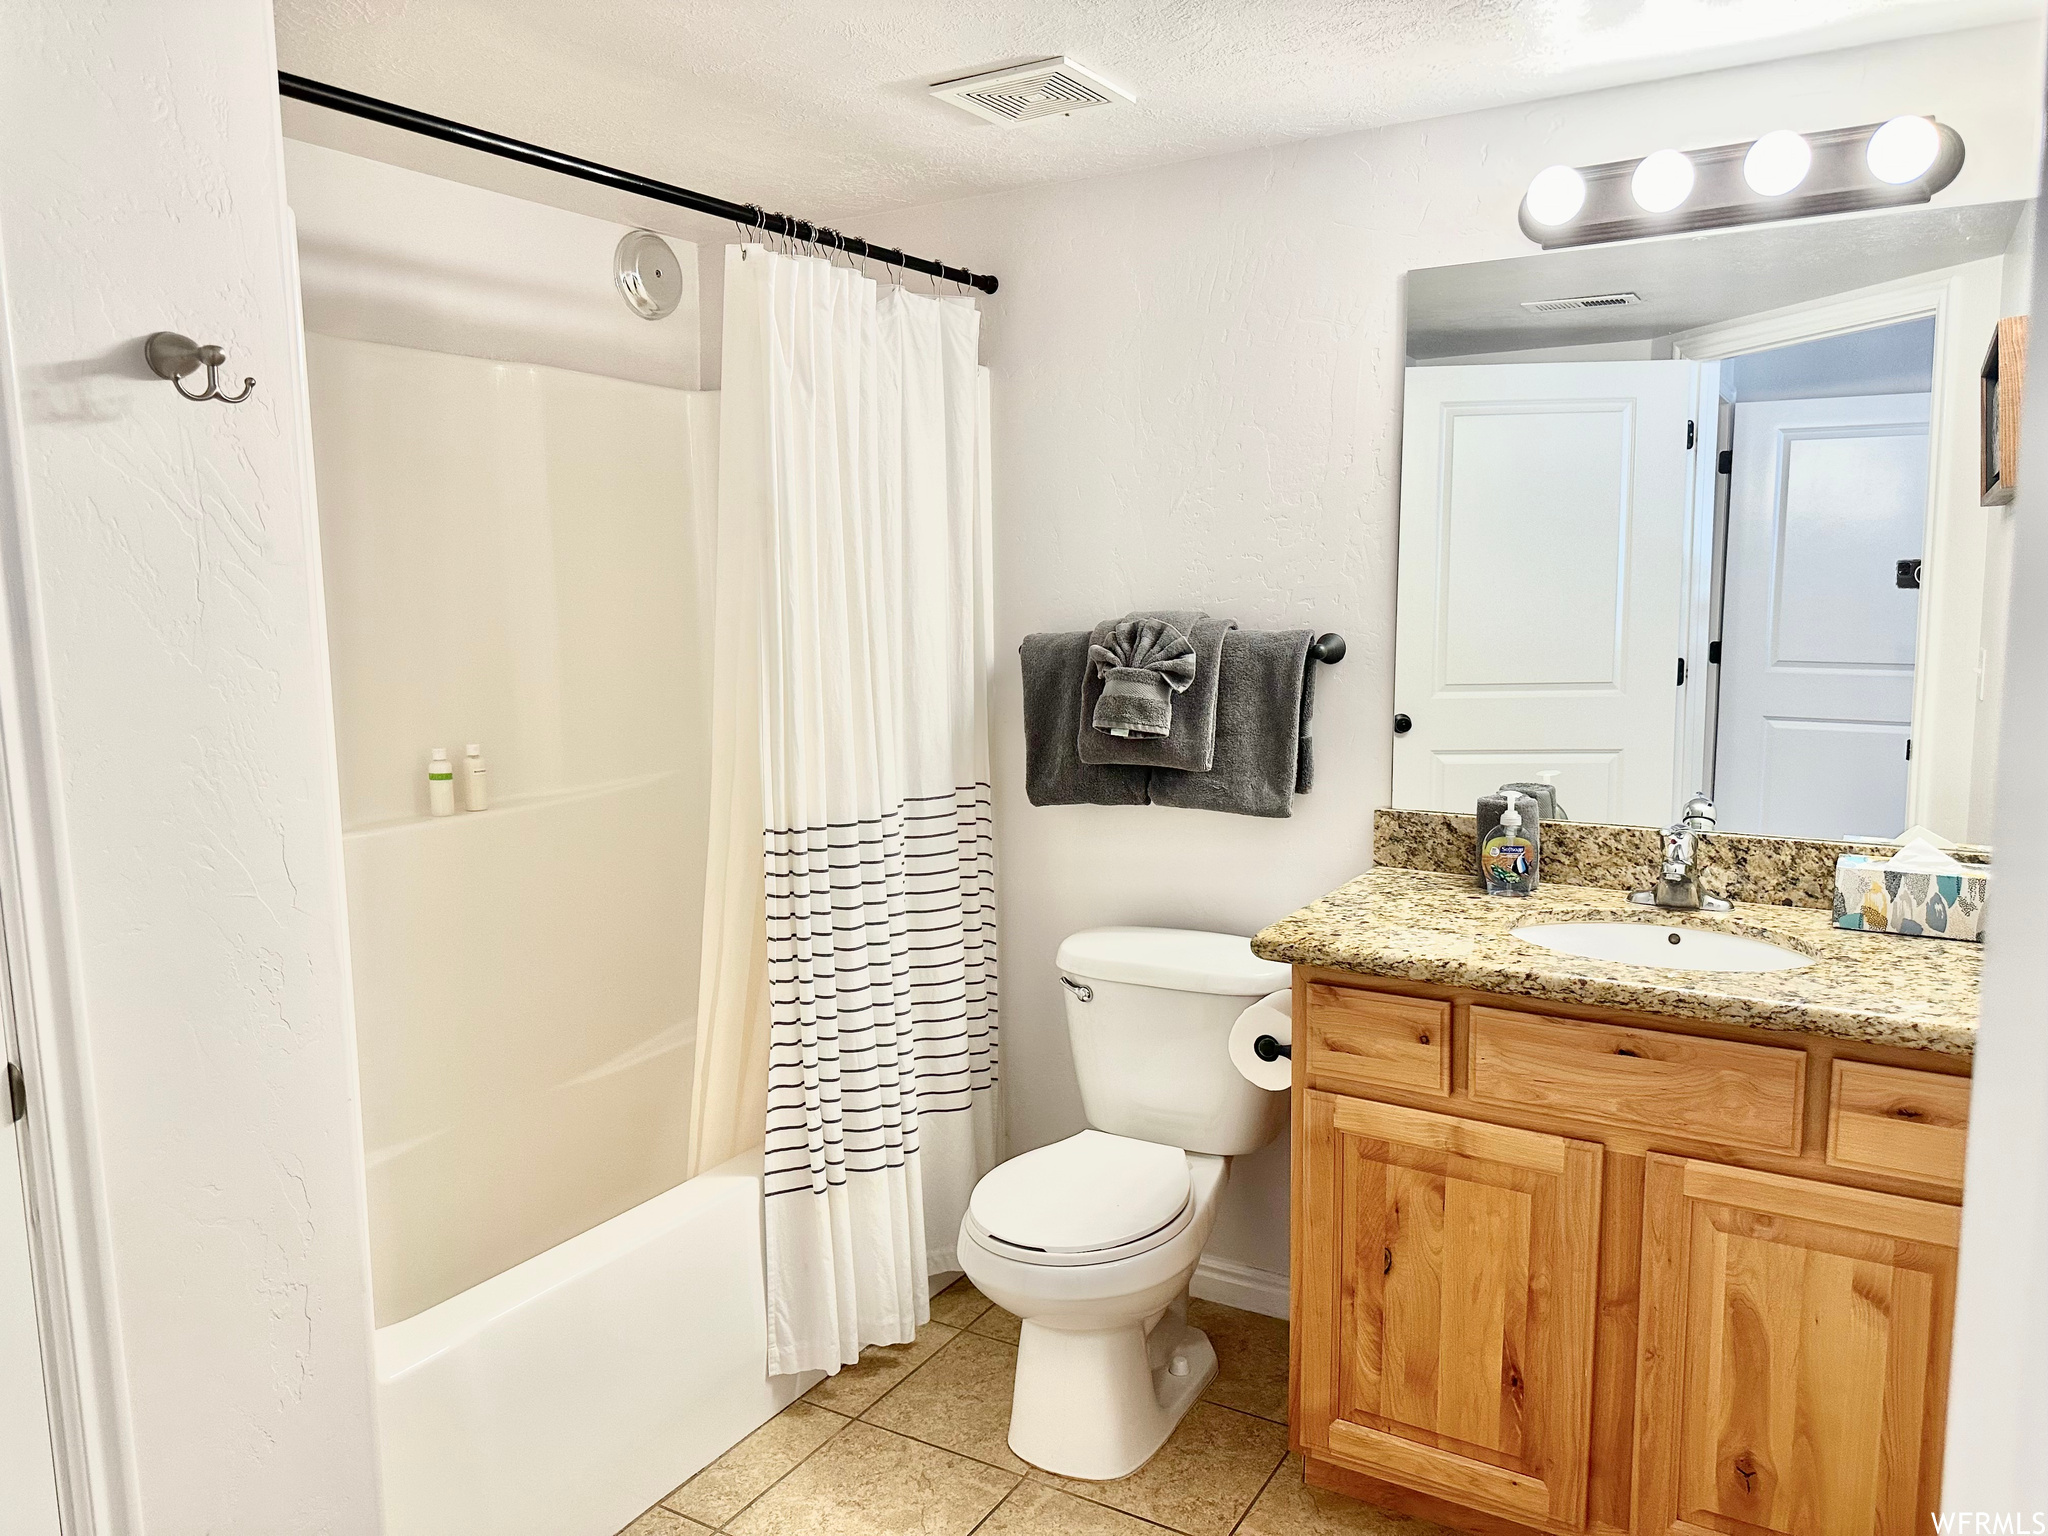 Full bathroom with toilet, a textured ceiling, large vanity, tile floors, and shower / tub combo with curtain